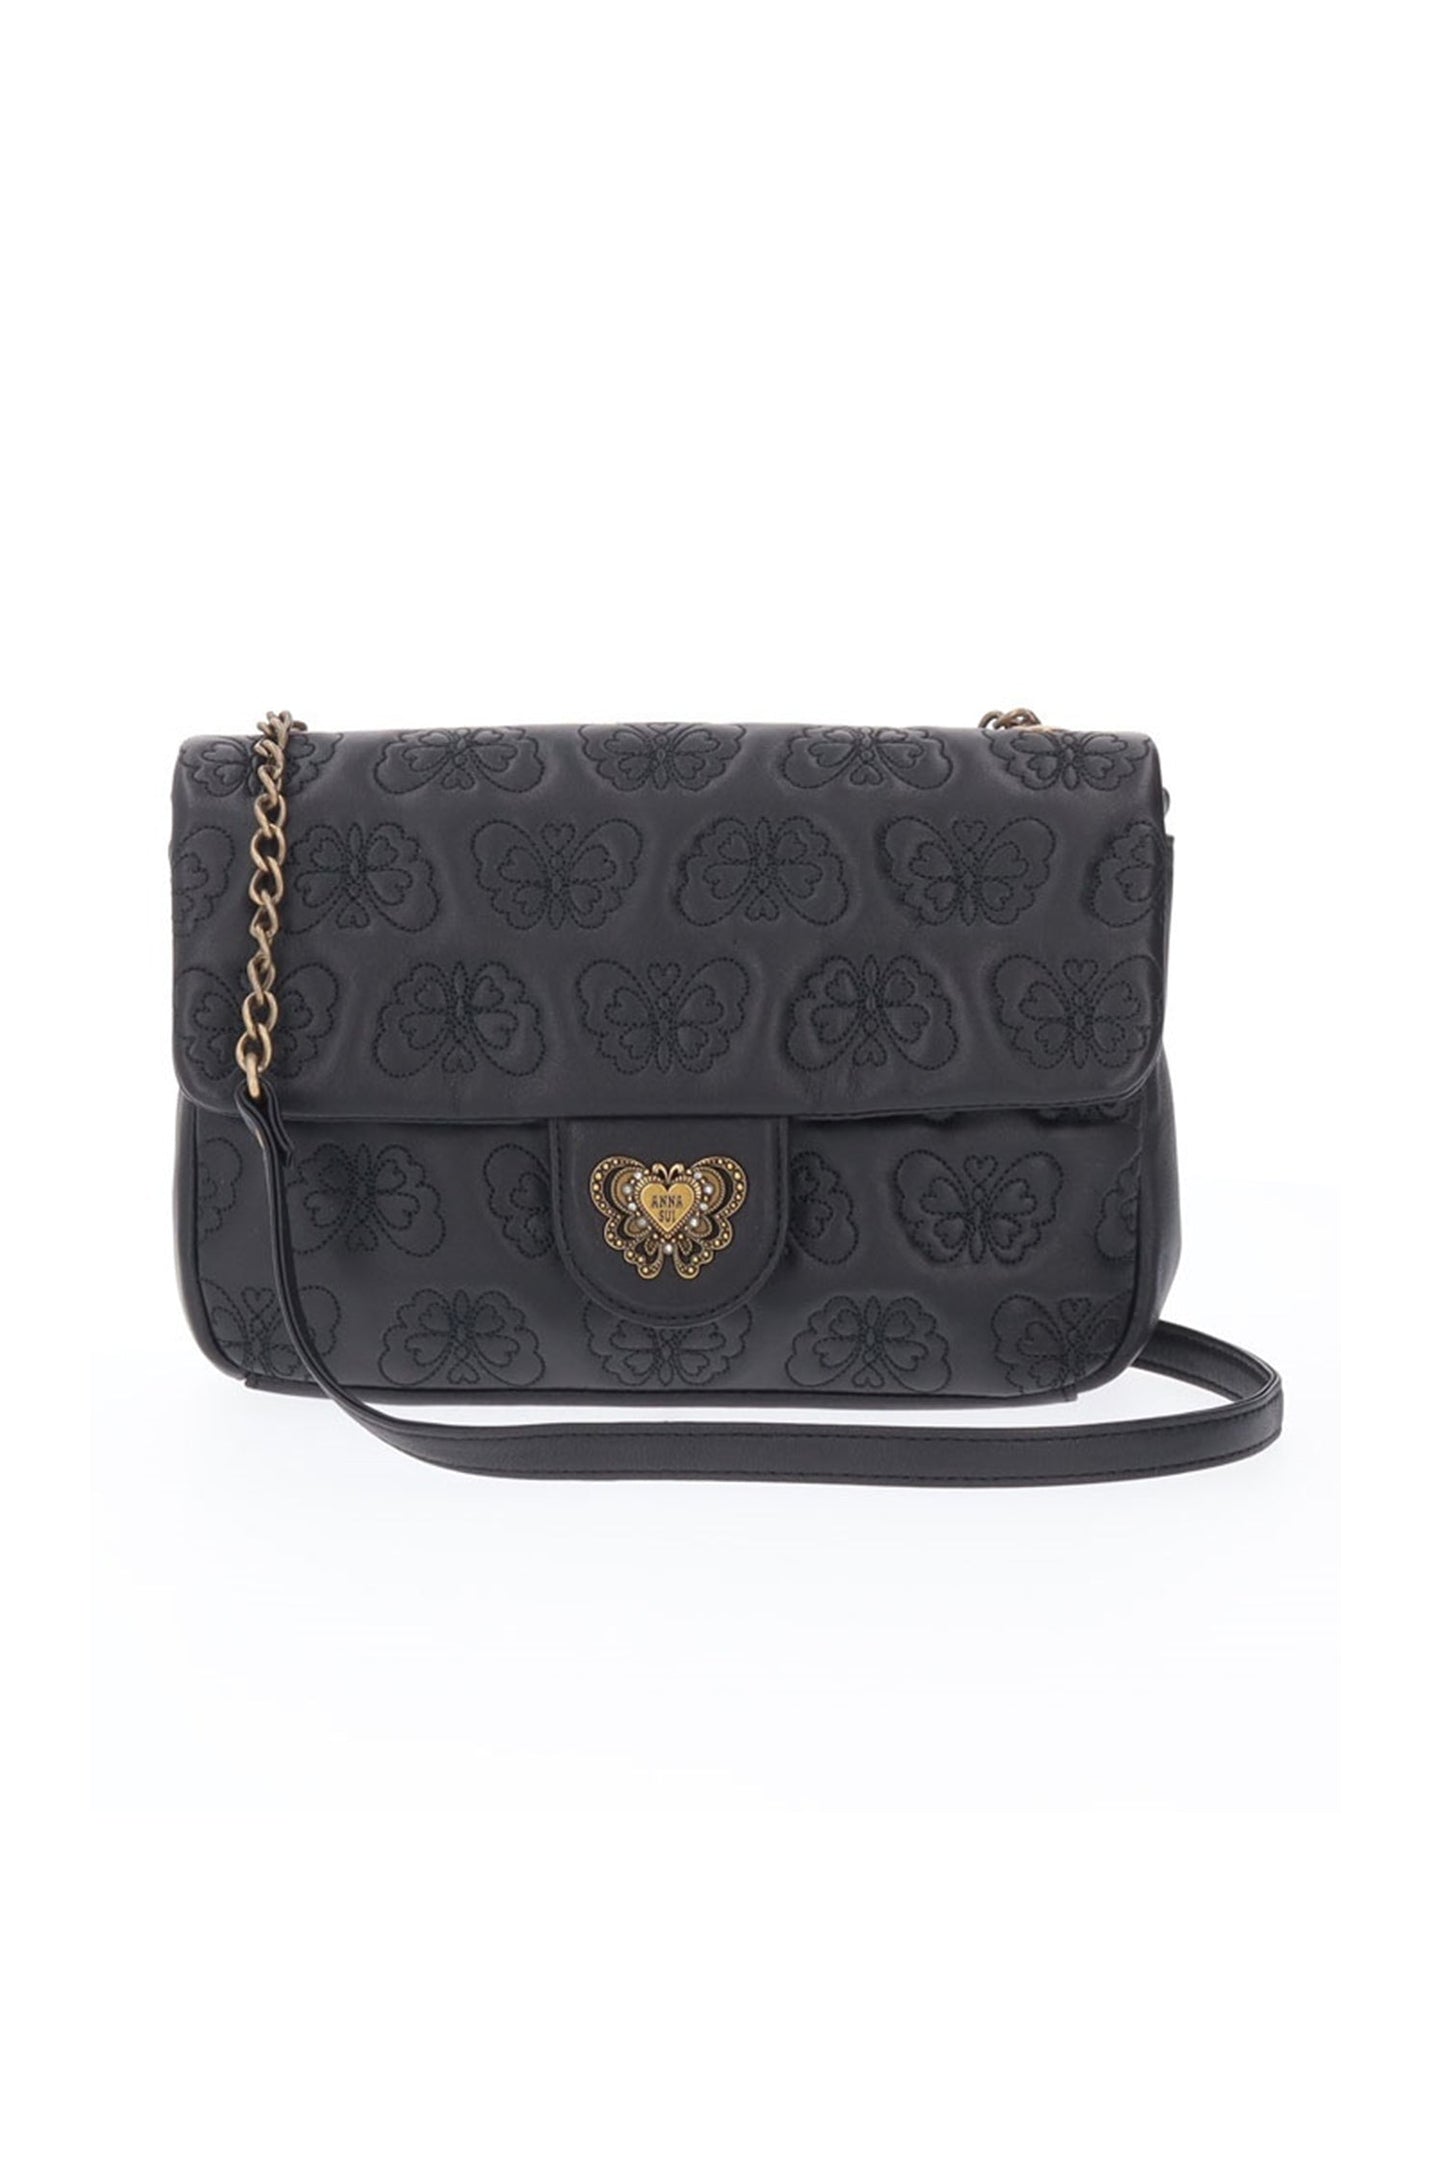 Chase Crossbody is in sheep leather embossed with Anna Sui signature butterflies, shoulder strap